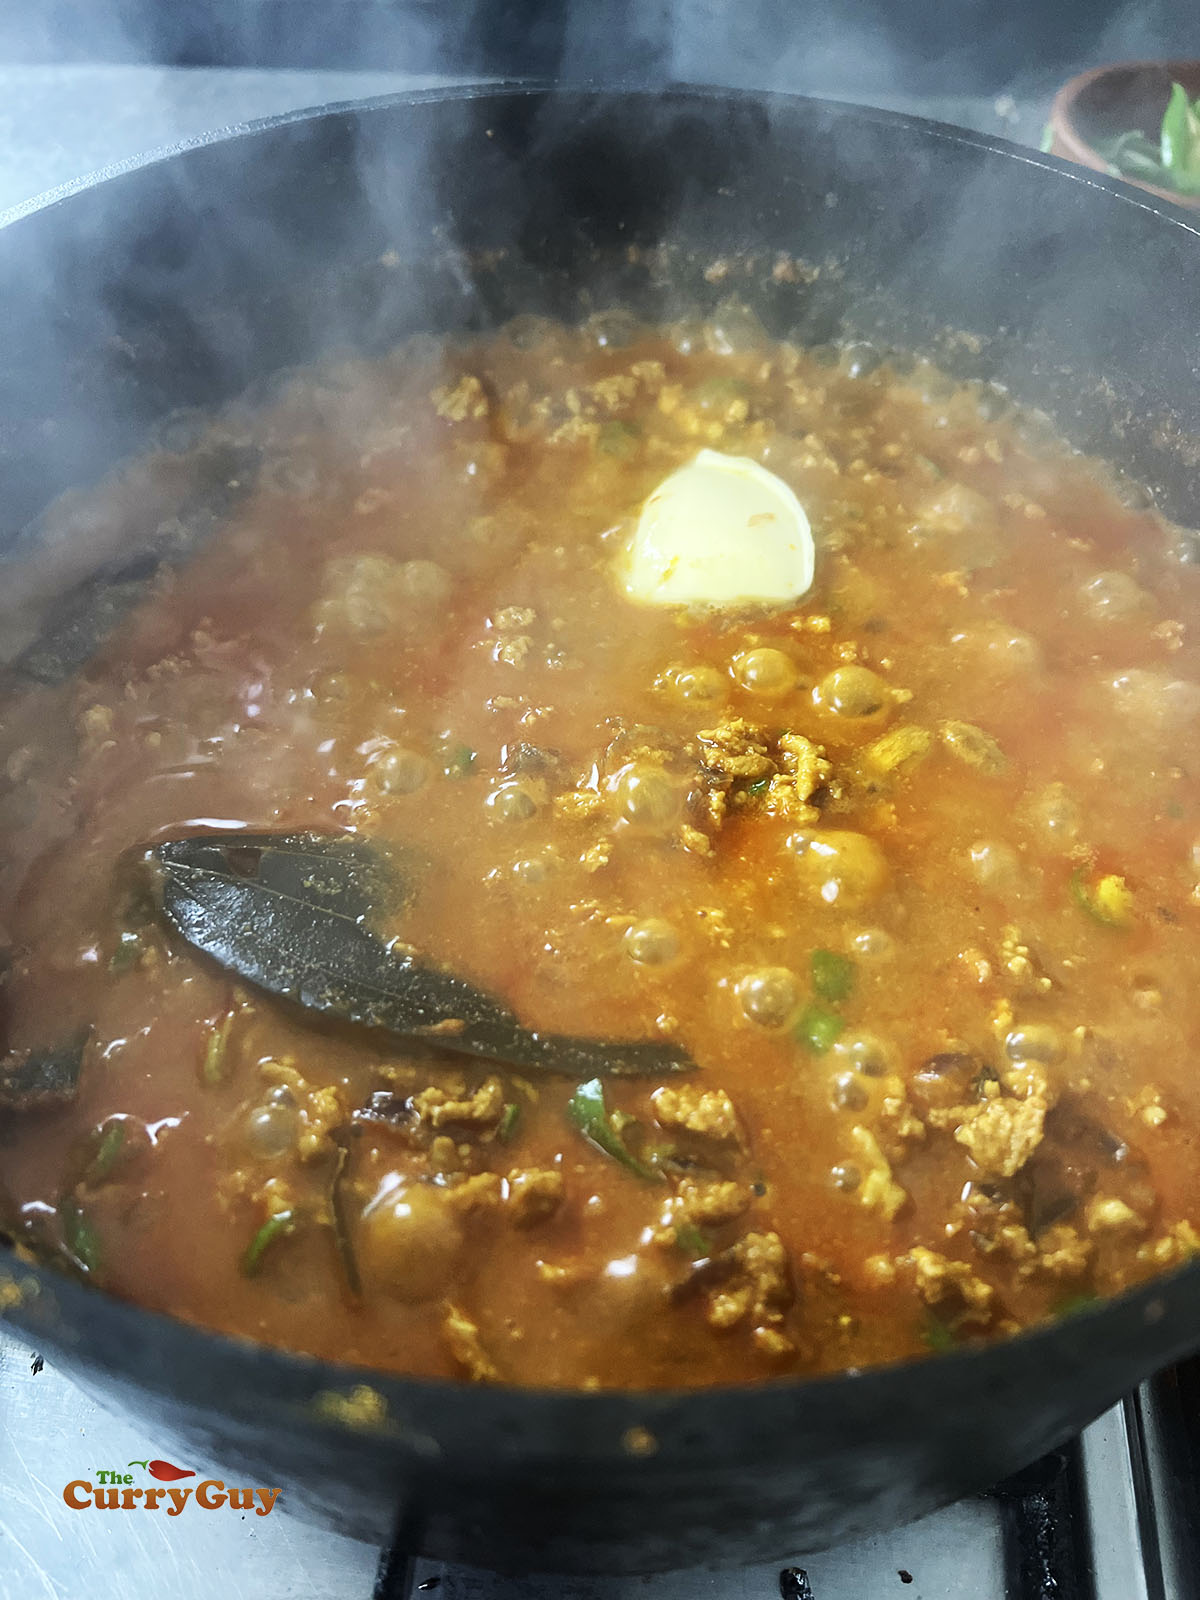 Adding butter and salt to taste to finish the keema curry.